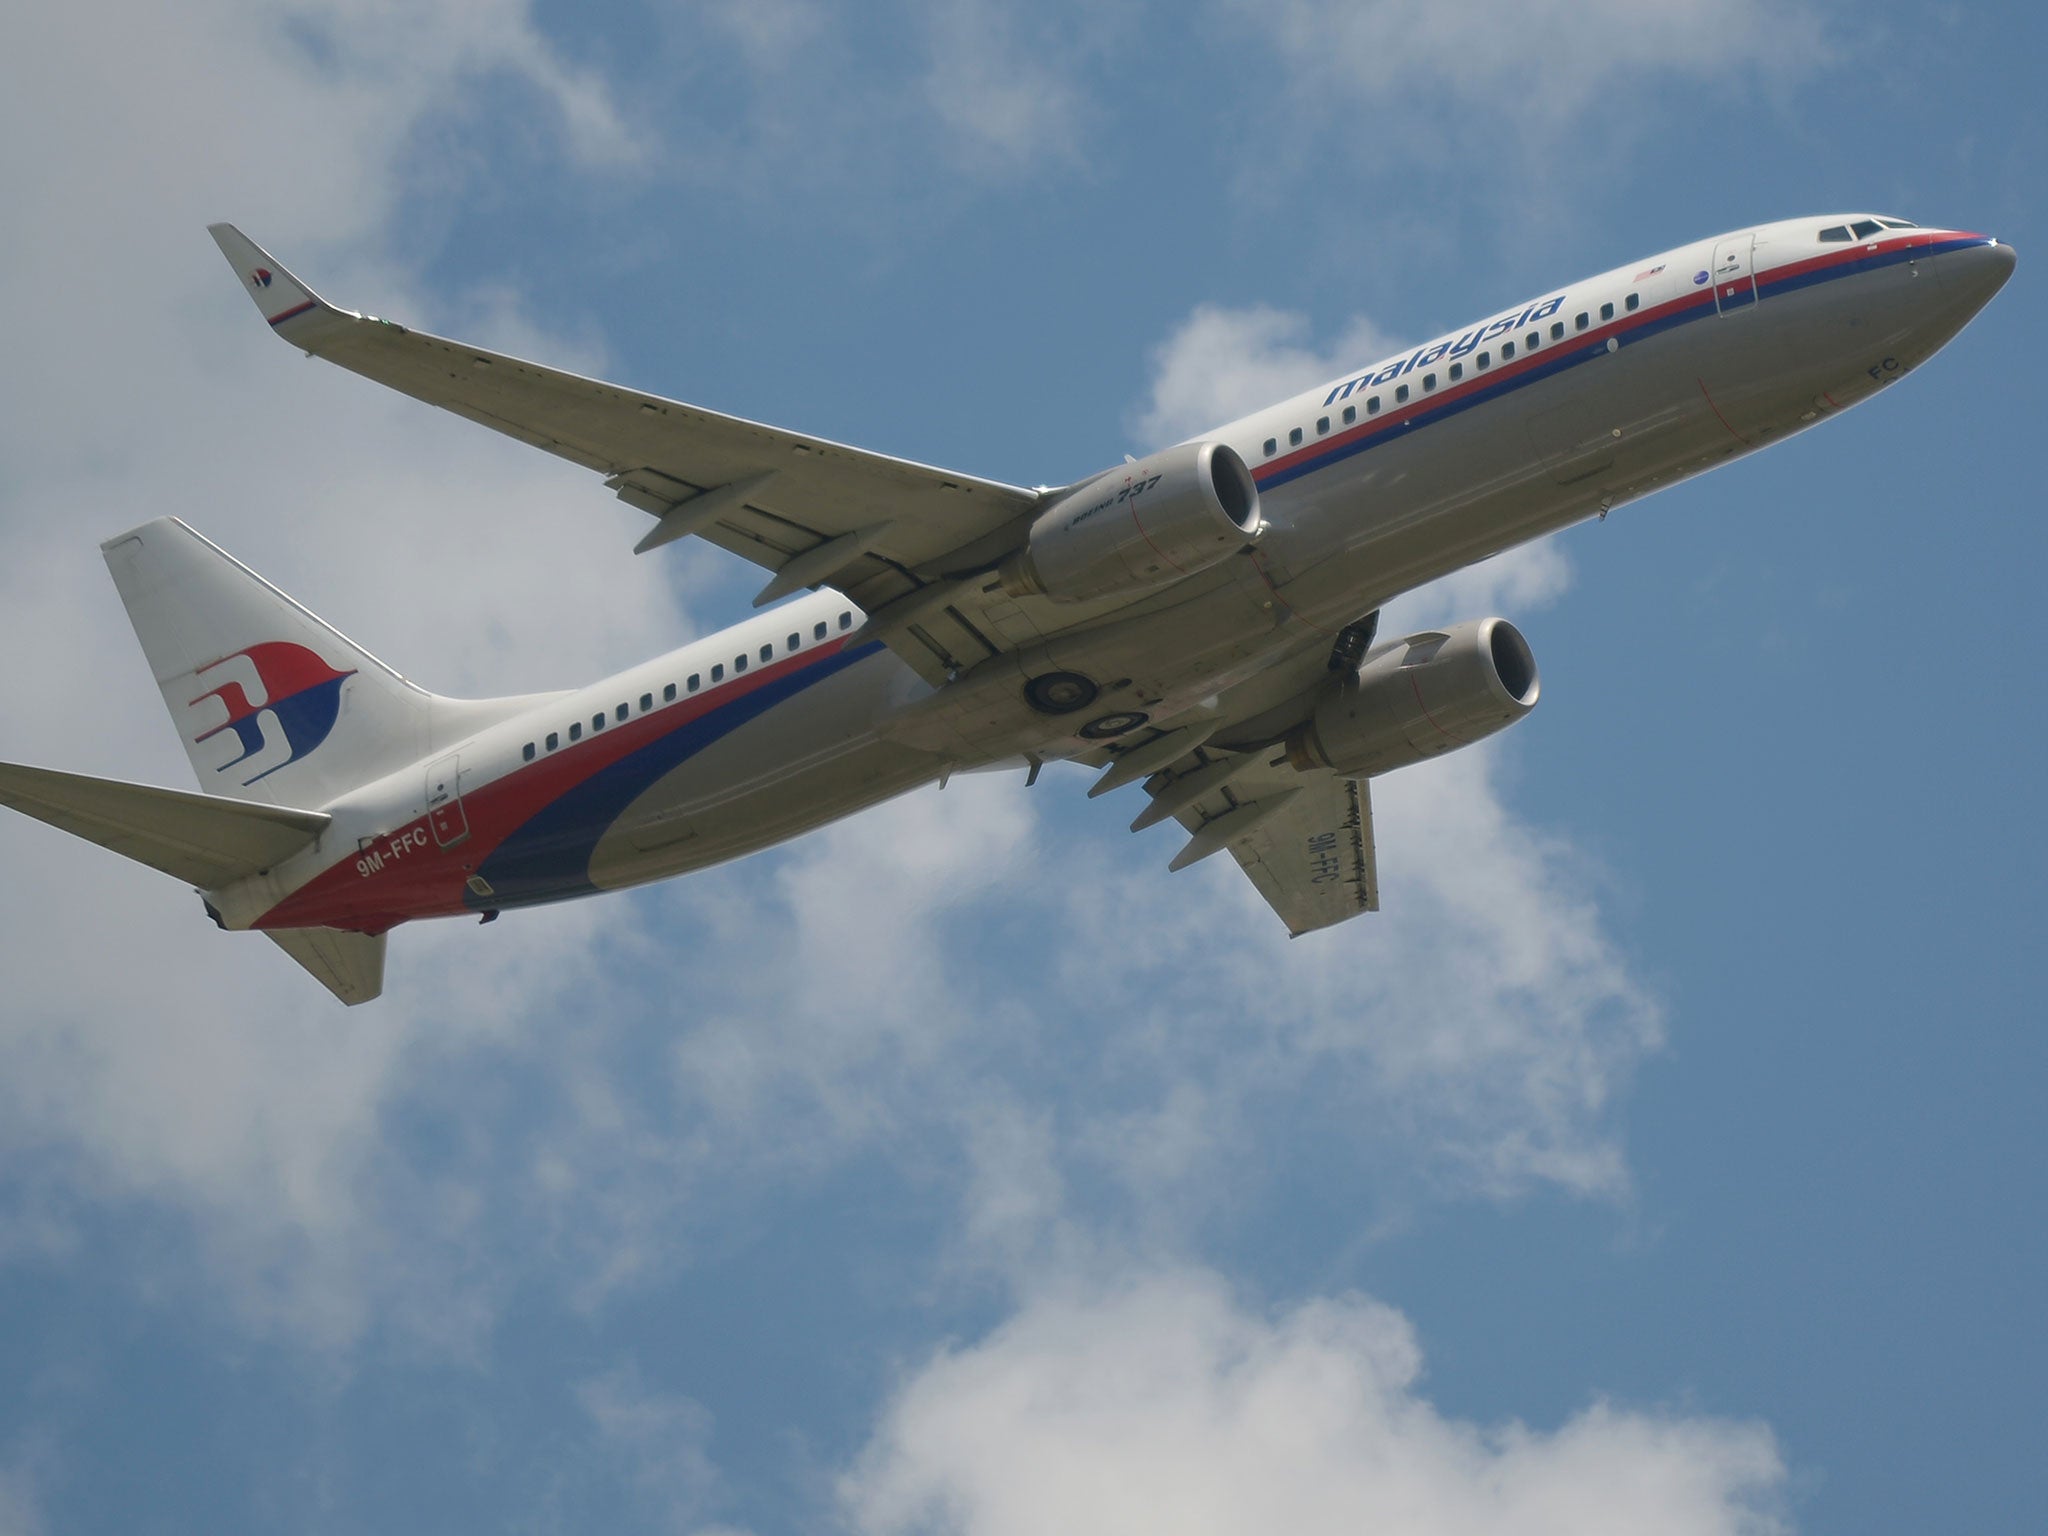 Malaysian Airlines has received a lot of criticism for choosing to fly over the war-torn Syria